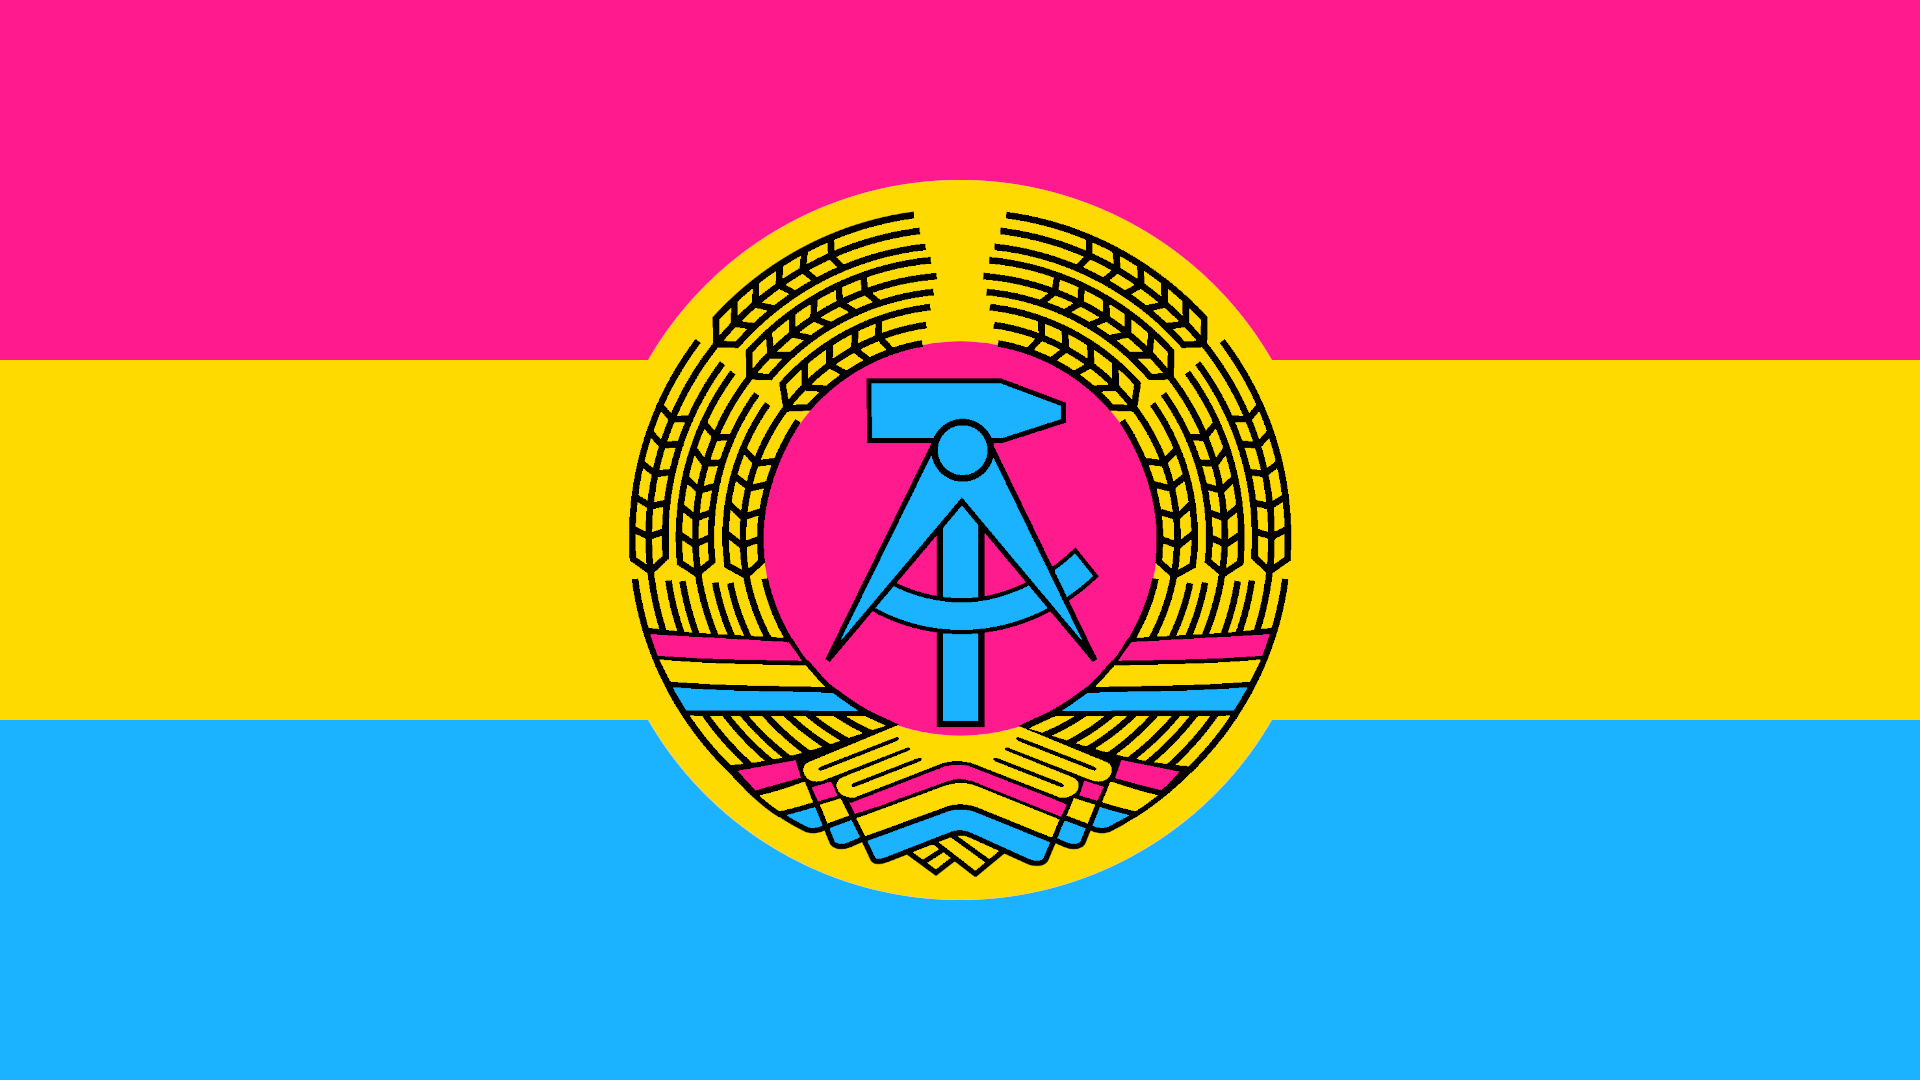 German Democratic Republic Flag with the Pansexual Pride